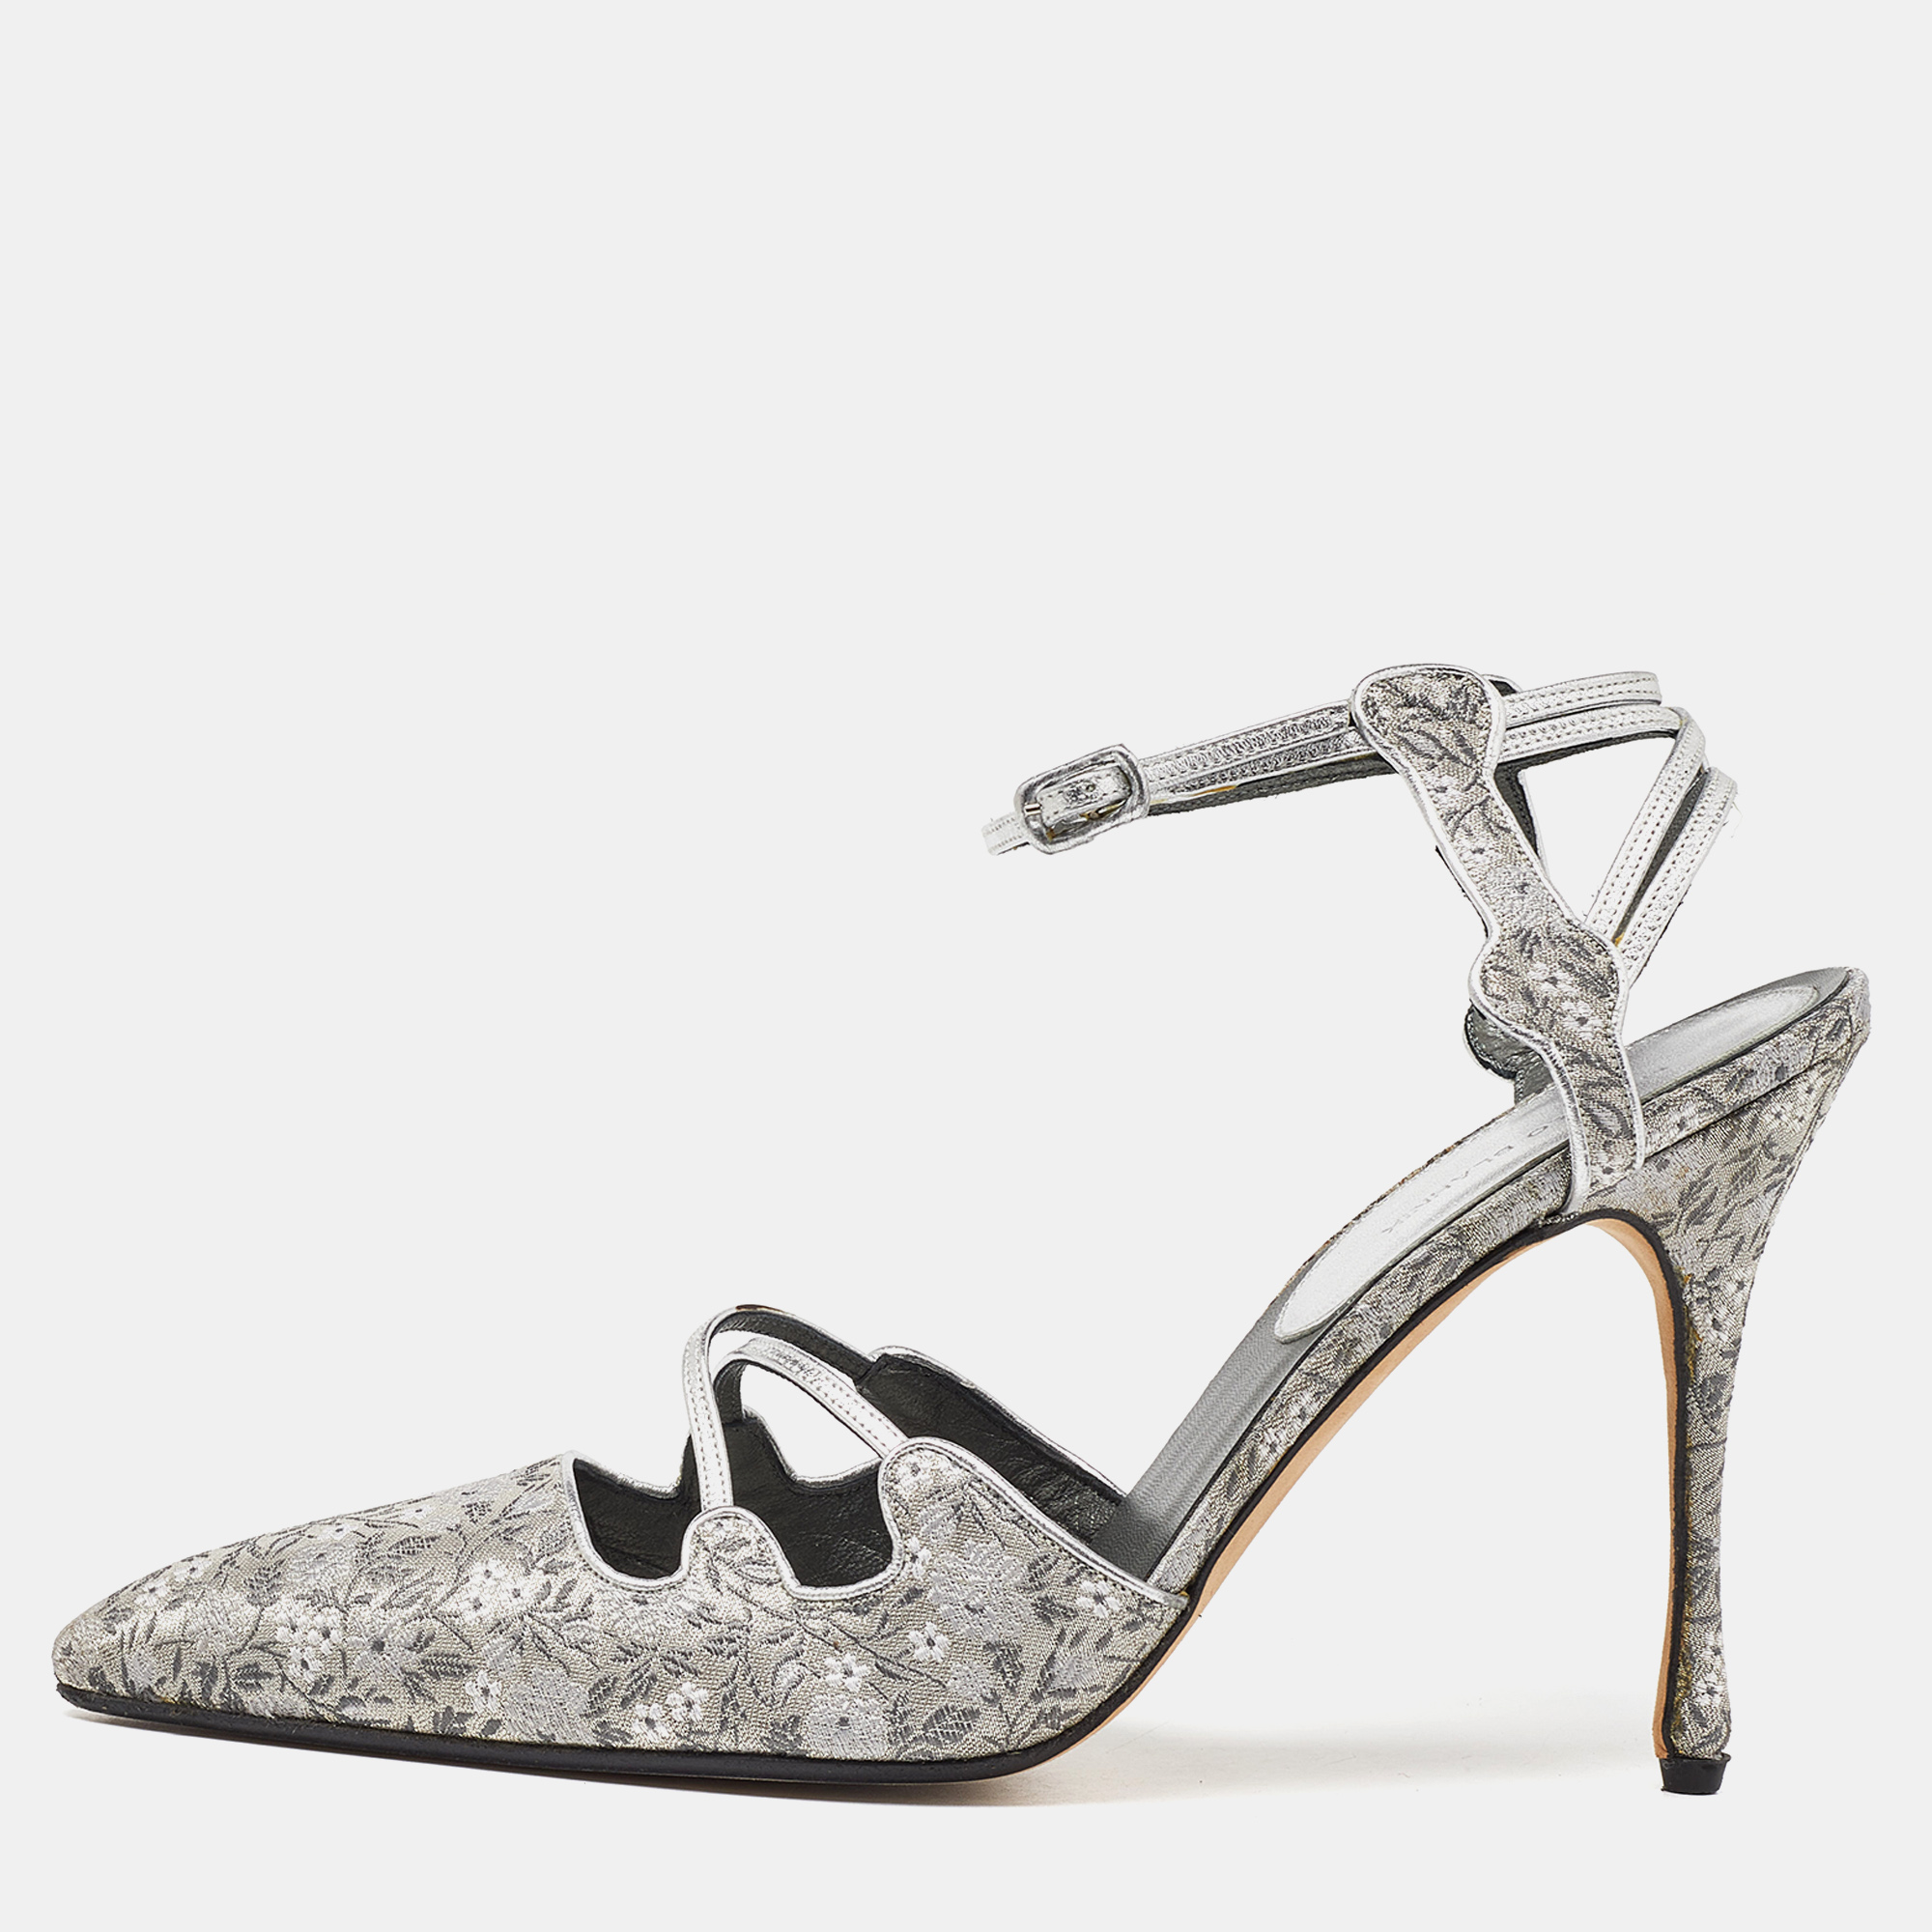 Manolo blahnik grey leather and brocade fabric pointed toe strappy pumps size 40.5